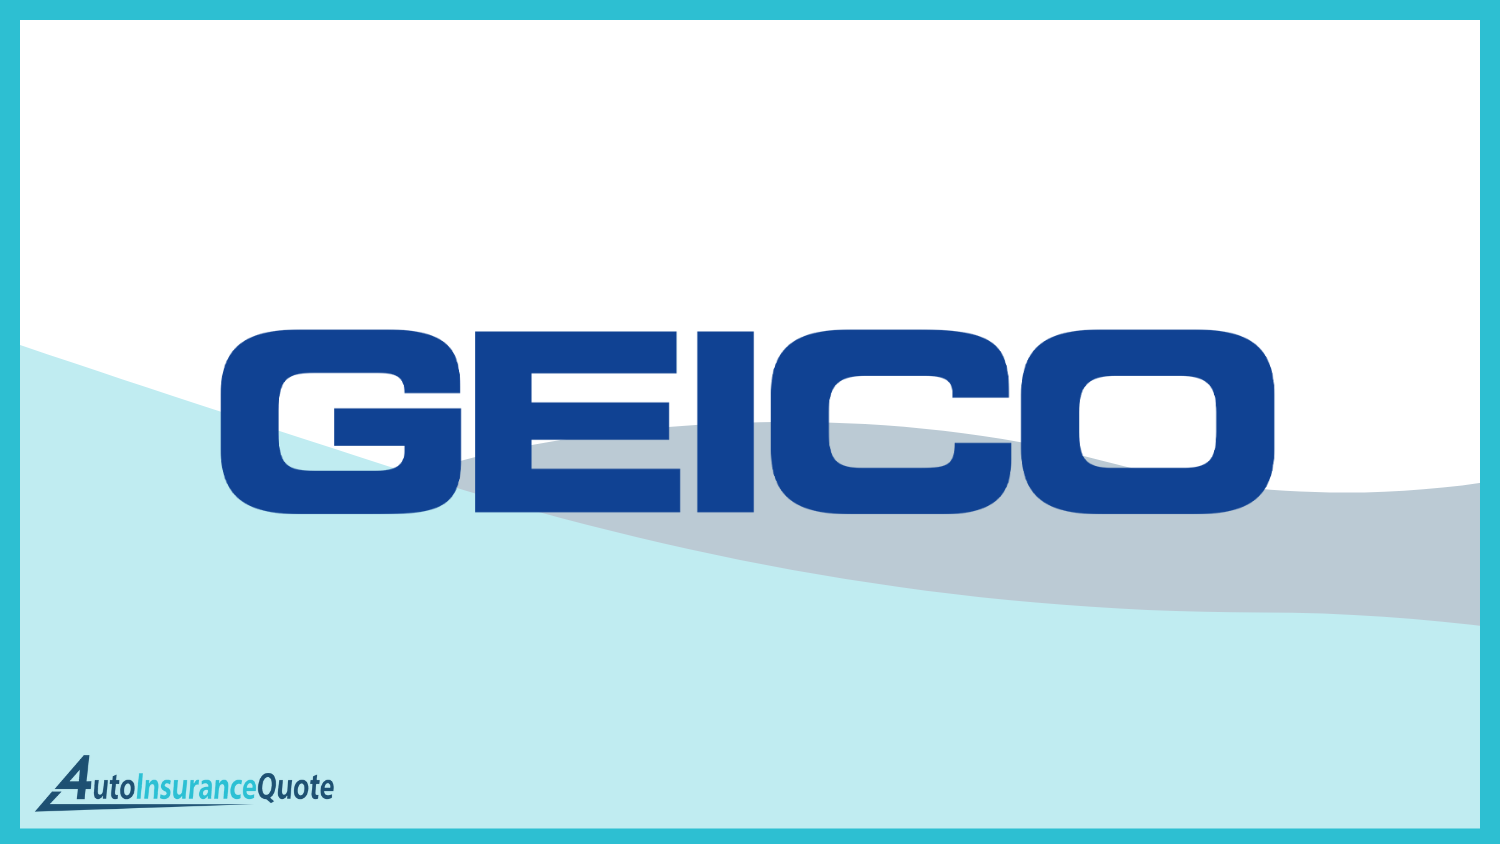 Geico: Best Auto Insurance for Government Employees